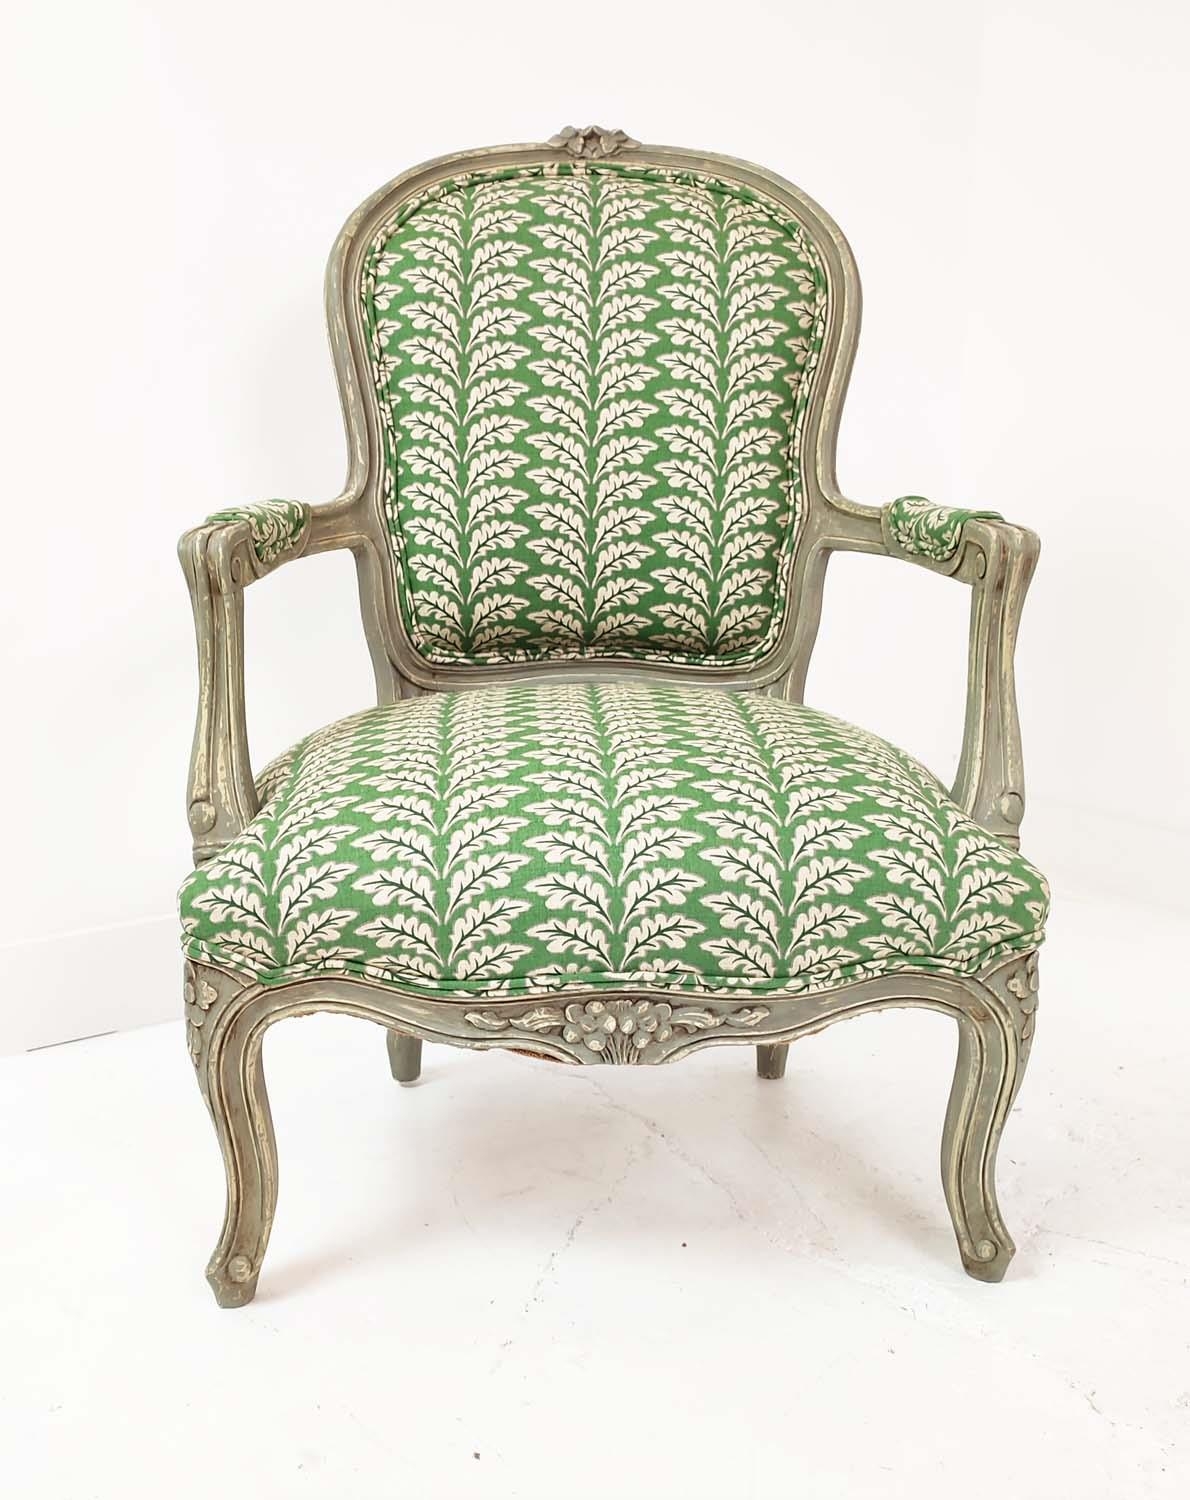 FAUTEUILS, a pair, Louis XV style, grey painted with green leaf patterned upholstery, 92cm H x - Image 4 of 8